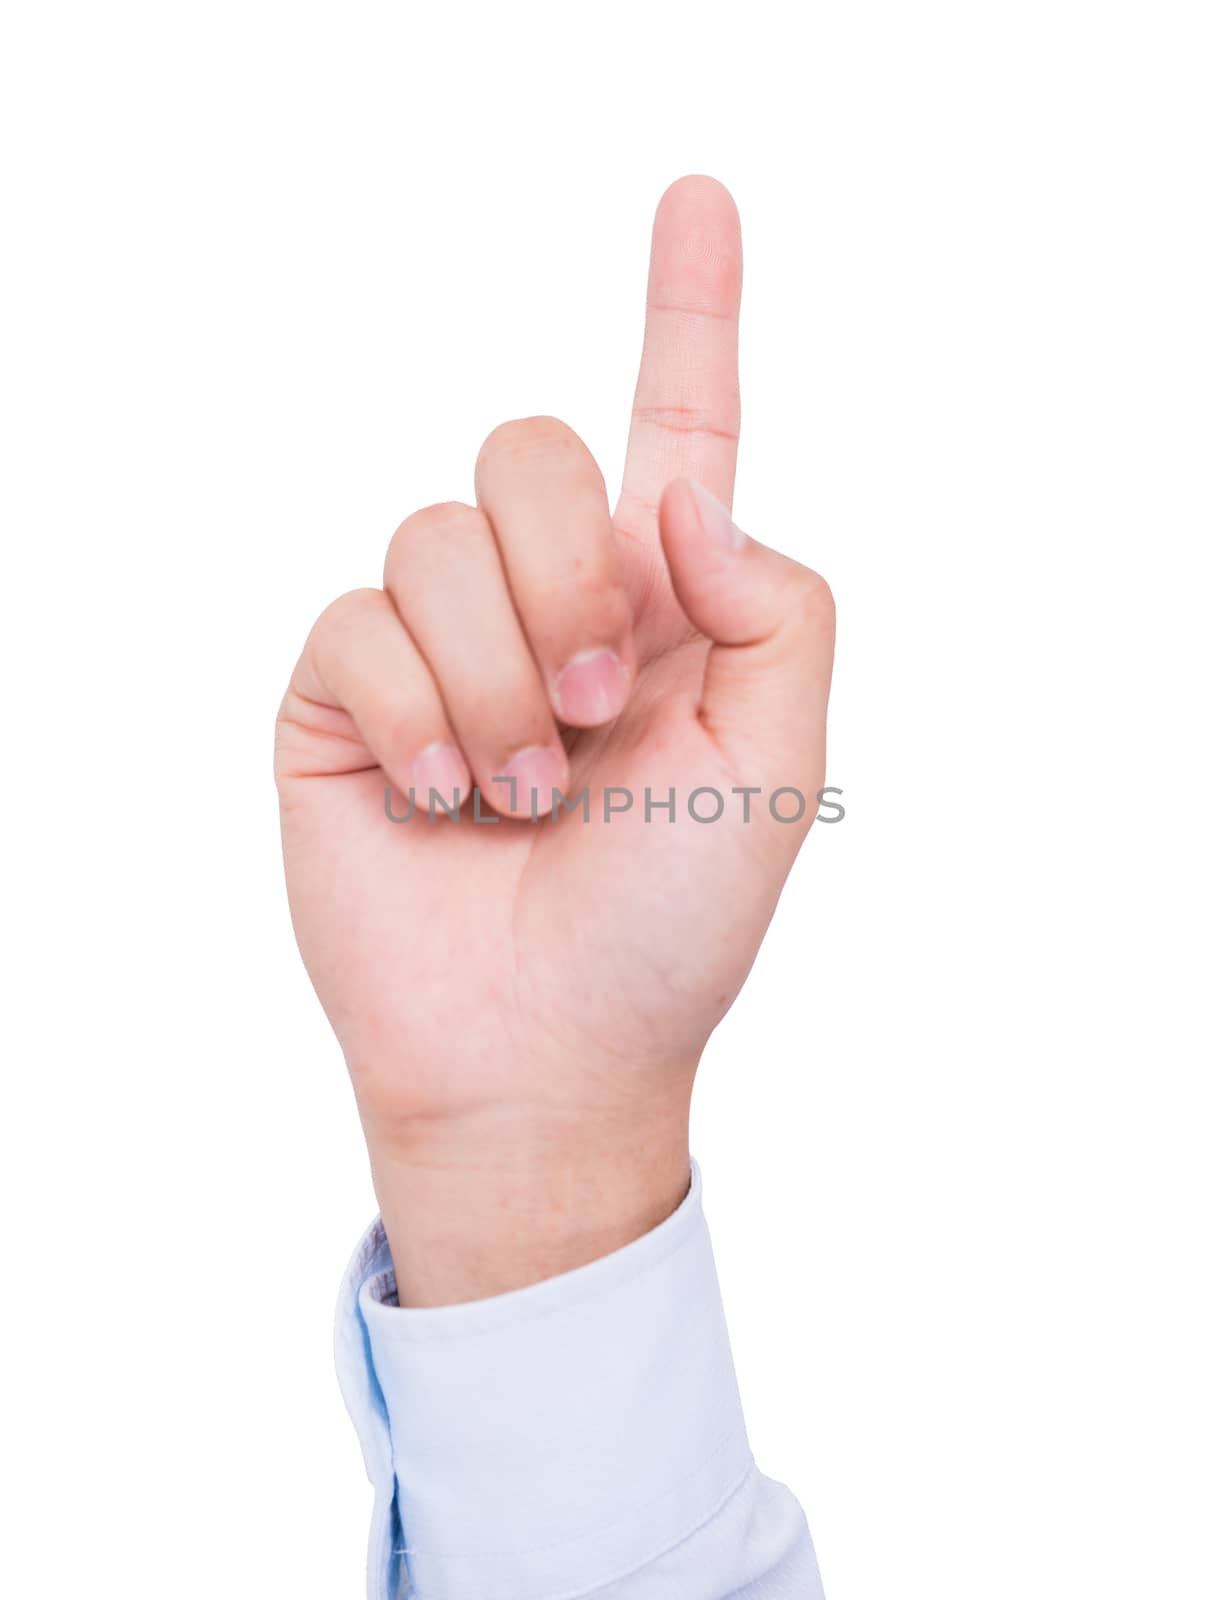 Business man front hand with the index finger pointing up isolate on white background